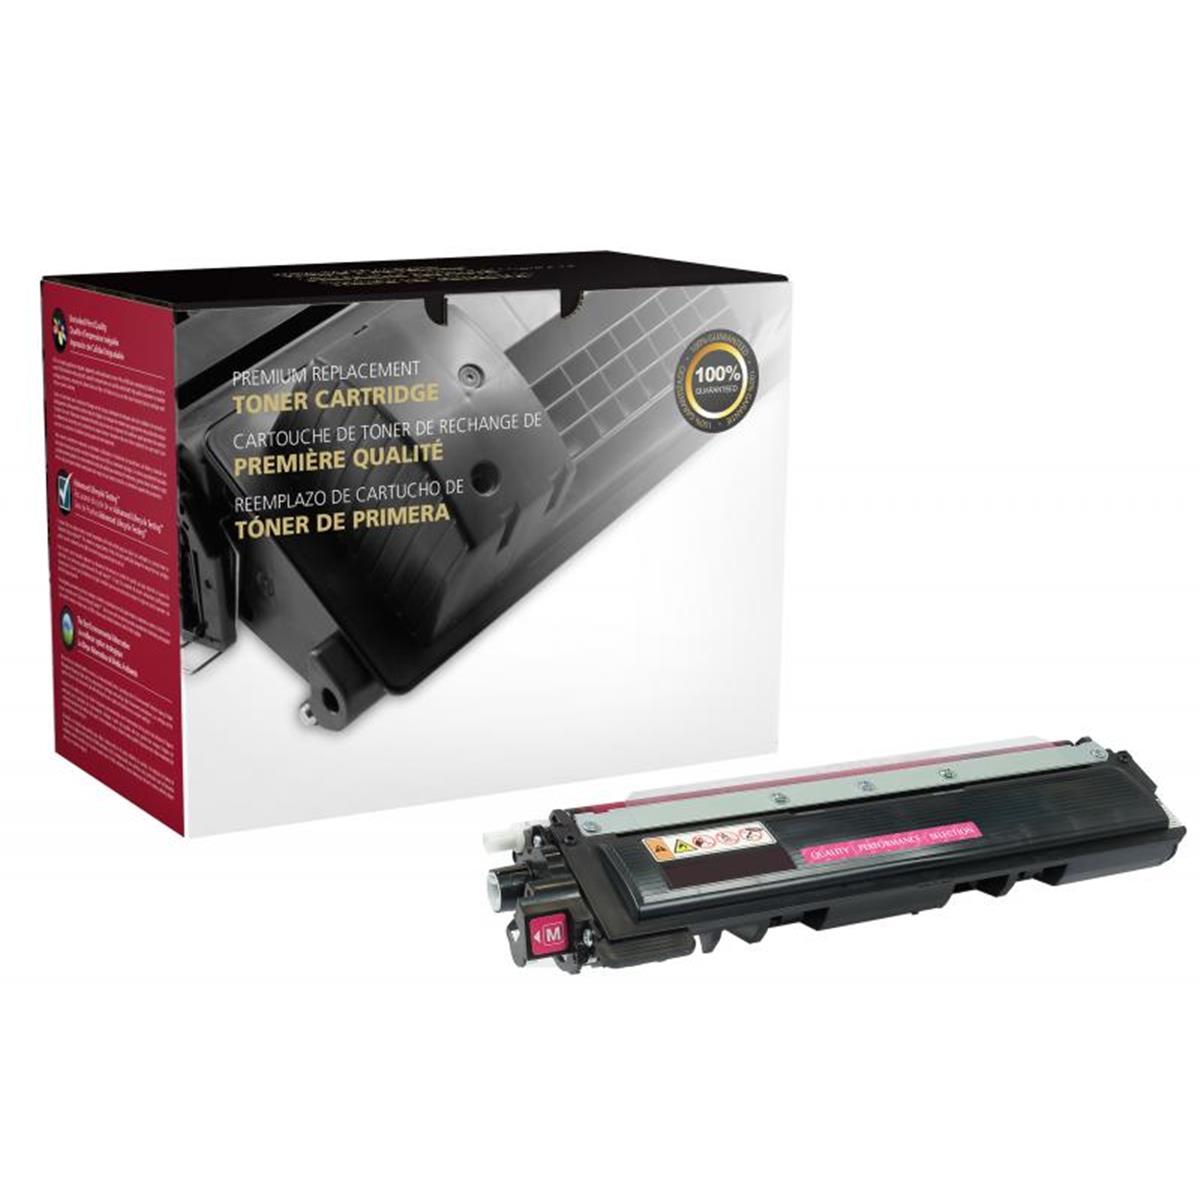 Picture of Brother 200471 Magenta Toner Cartridge for TN210